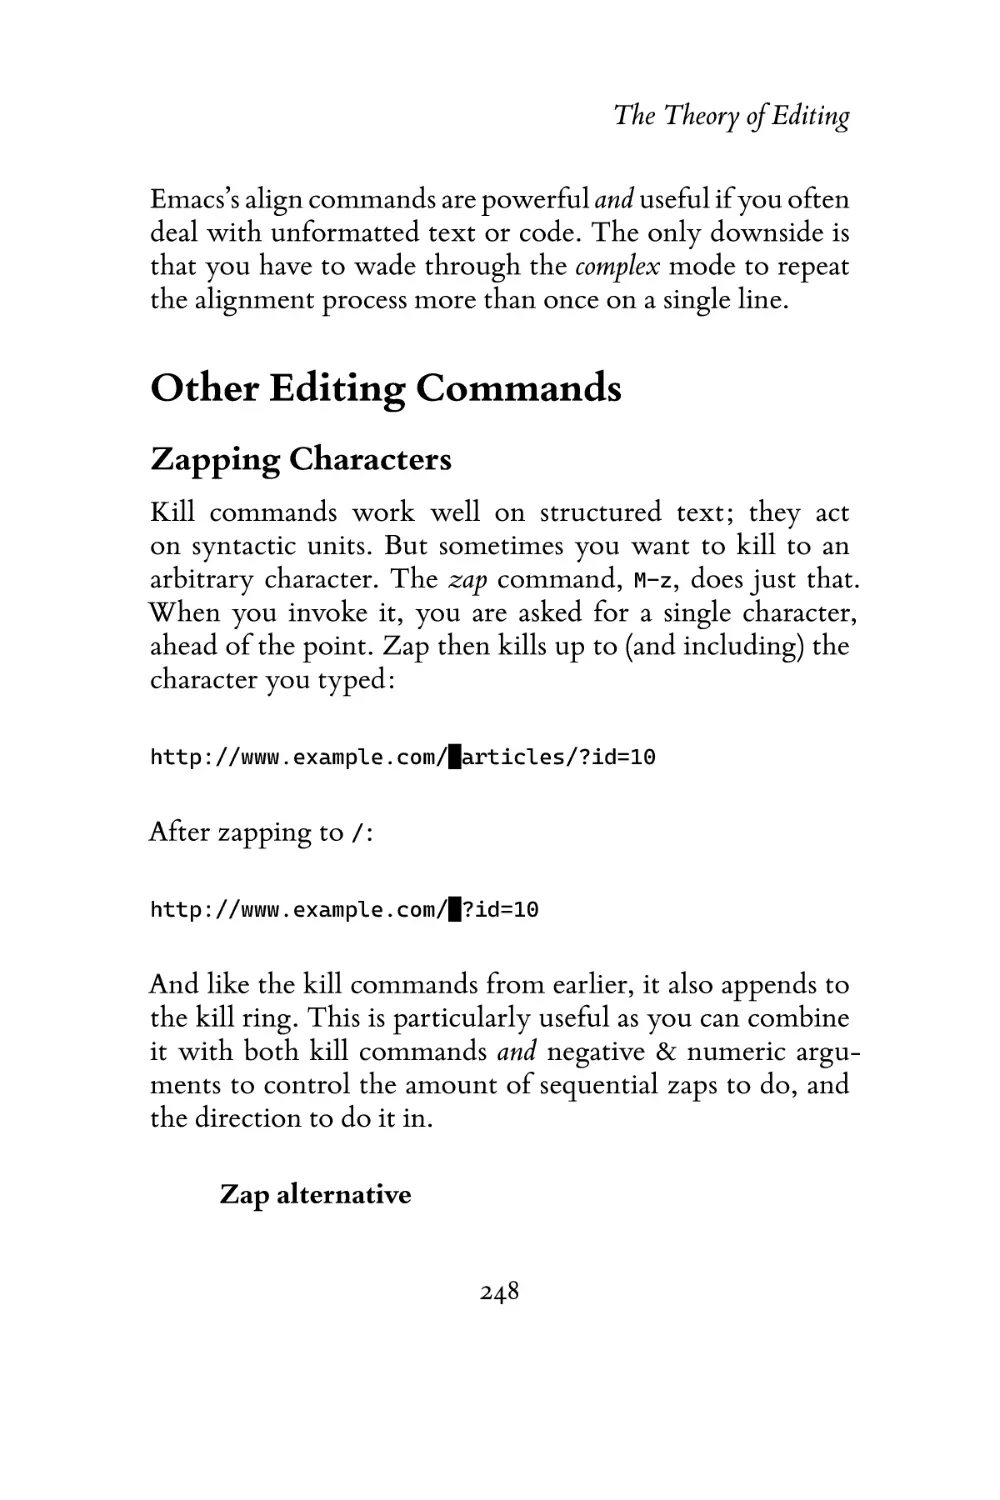 Other Editing Commands
Zapping Characters